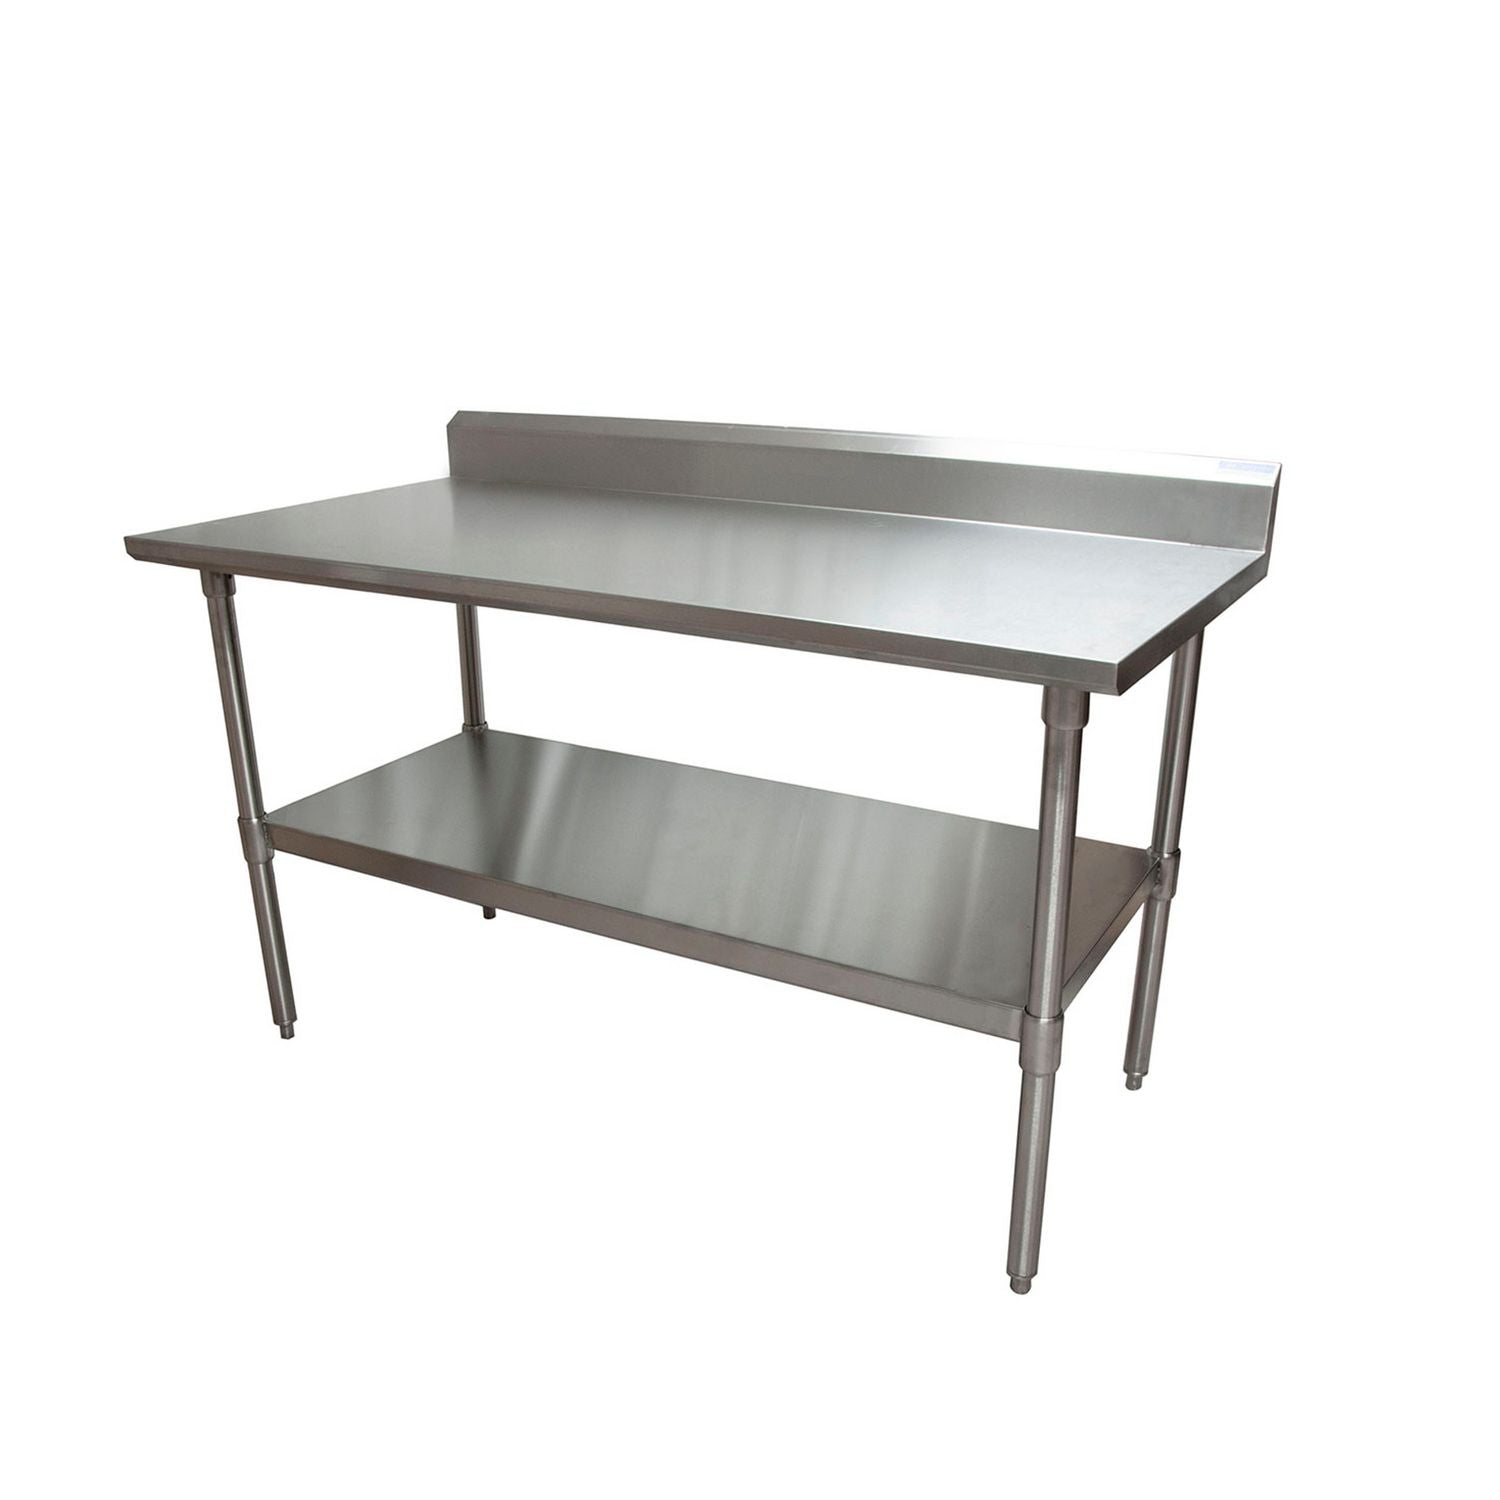 stainless-steel-5-riser-top-tables-60w-x-30d-x-3975h-silver-2-pallet-ships-in-4-6-business-days_bke2vtr56030 - 8